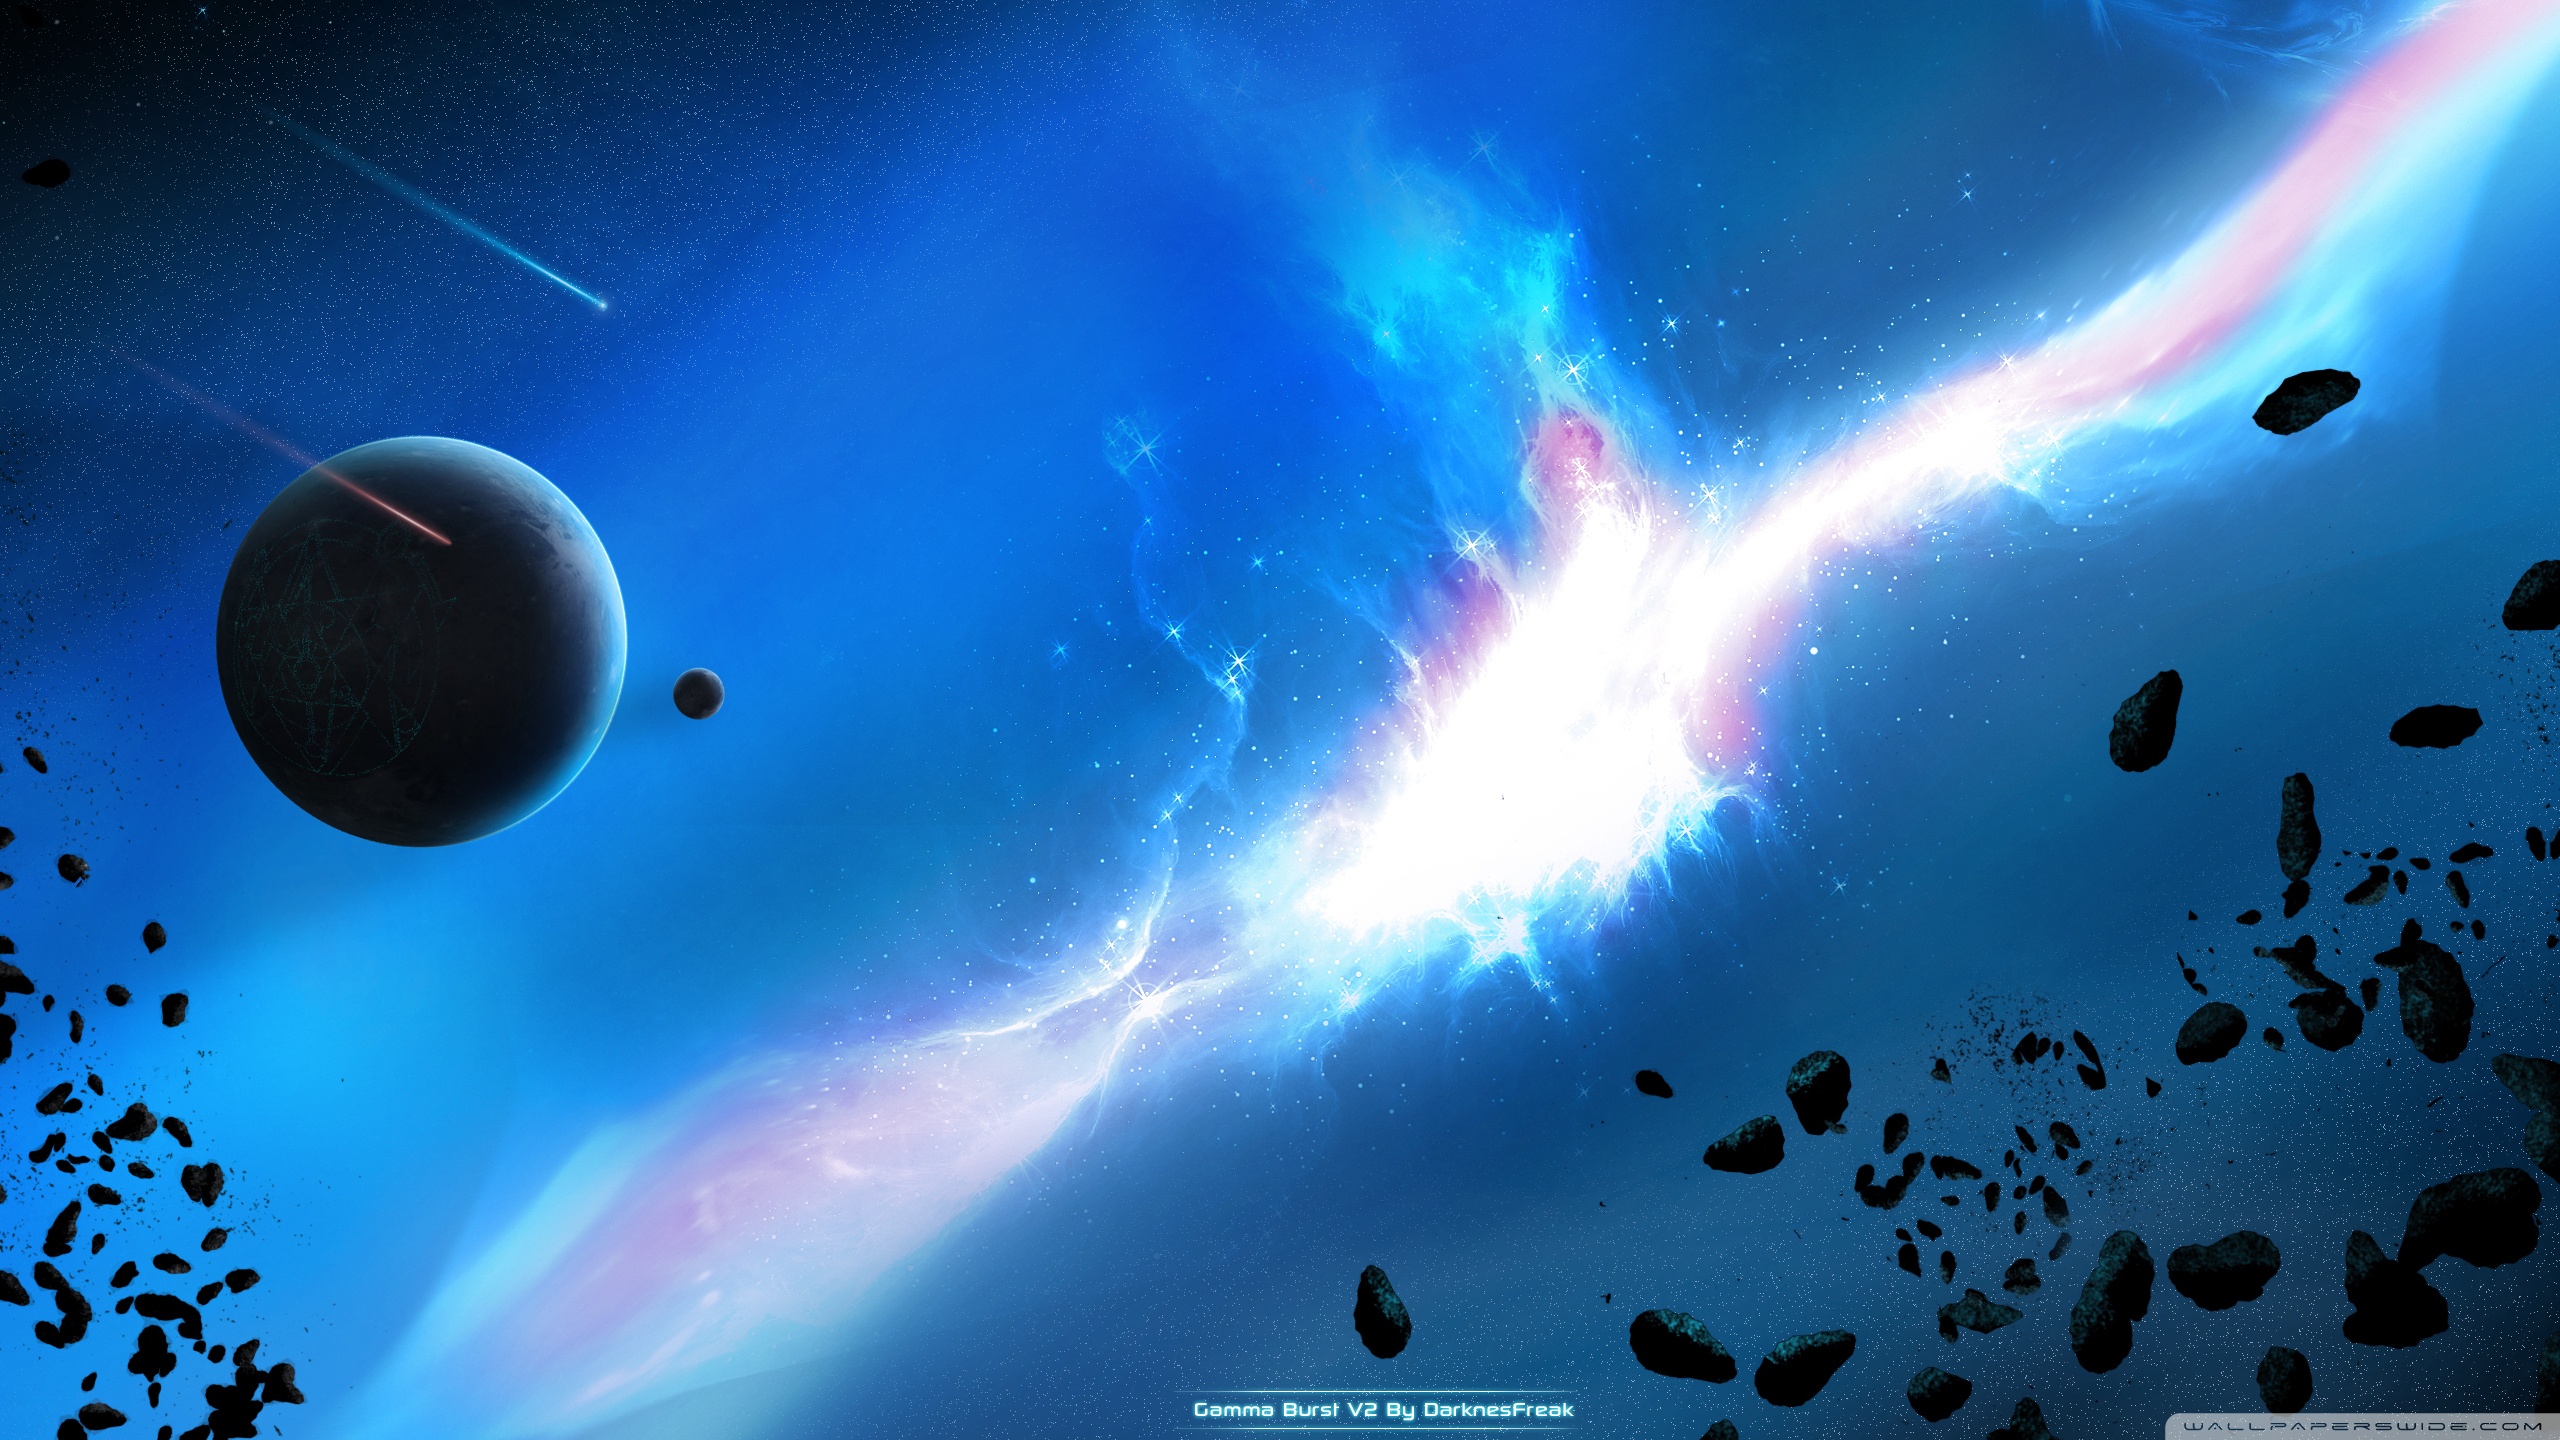 Hd Wallpapers For Pc 1920x1080 Space Gamma Burst - HD Wallpaper 